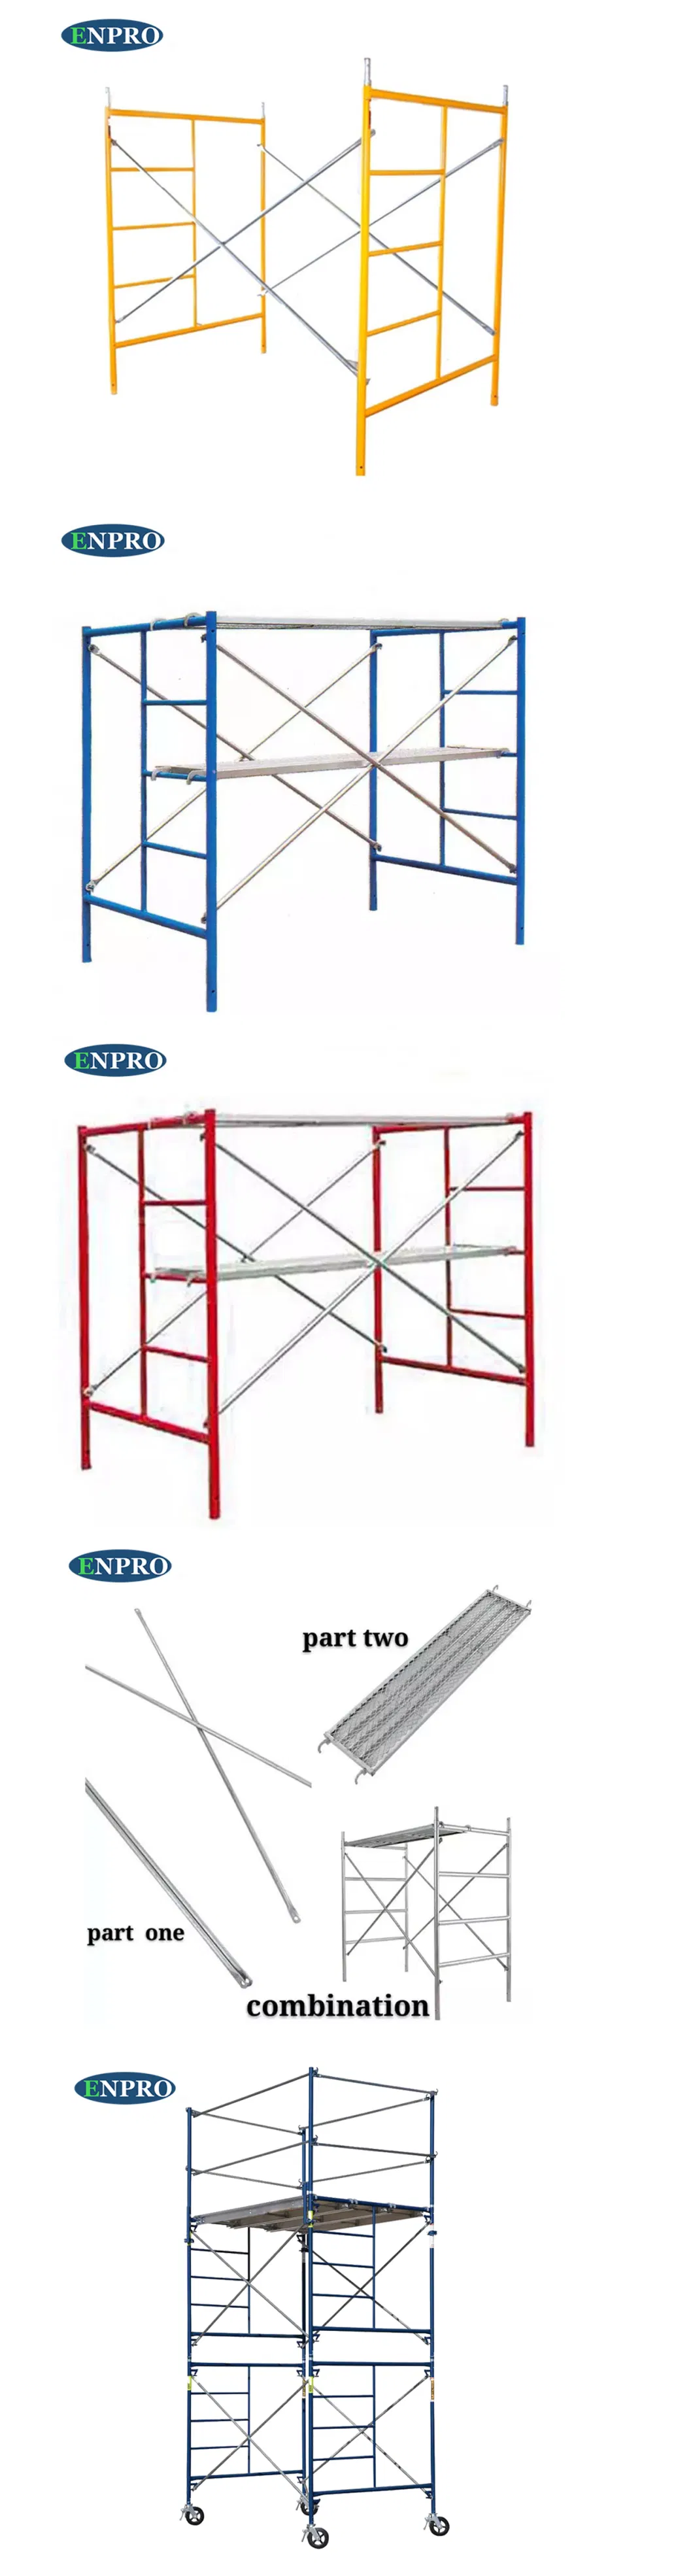 China Wholesale America Style Power Coated Steel Metal Construction Decoration Mason Ladder Frame Scaffolding with Different Colors for Option